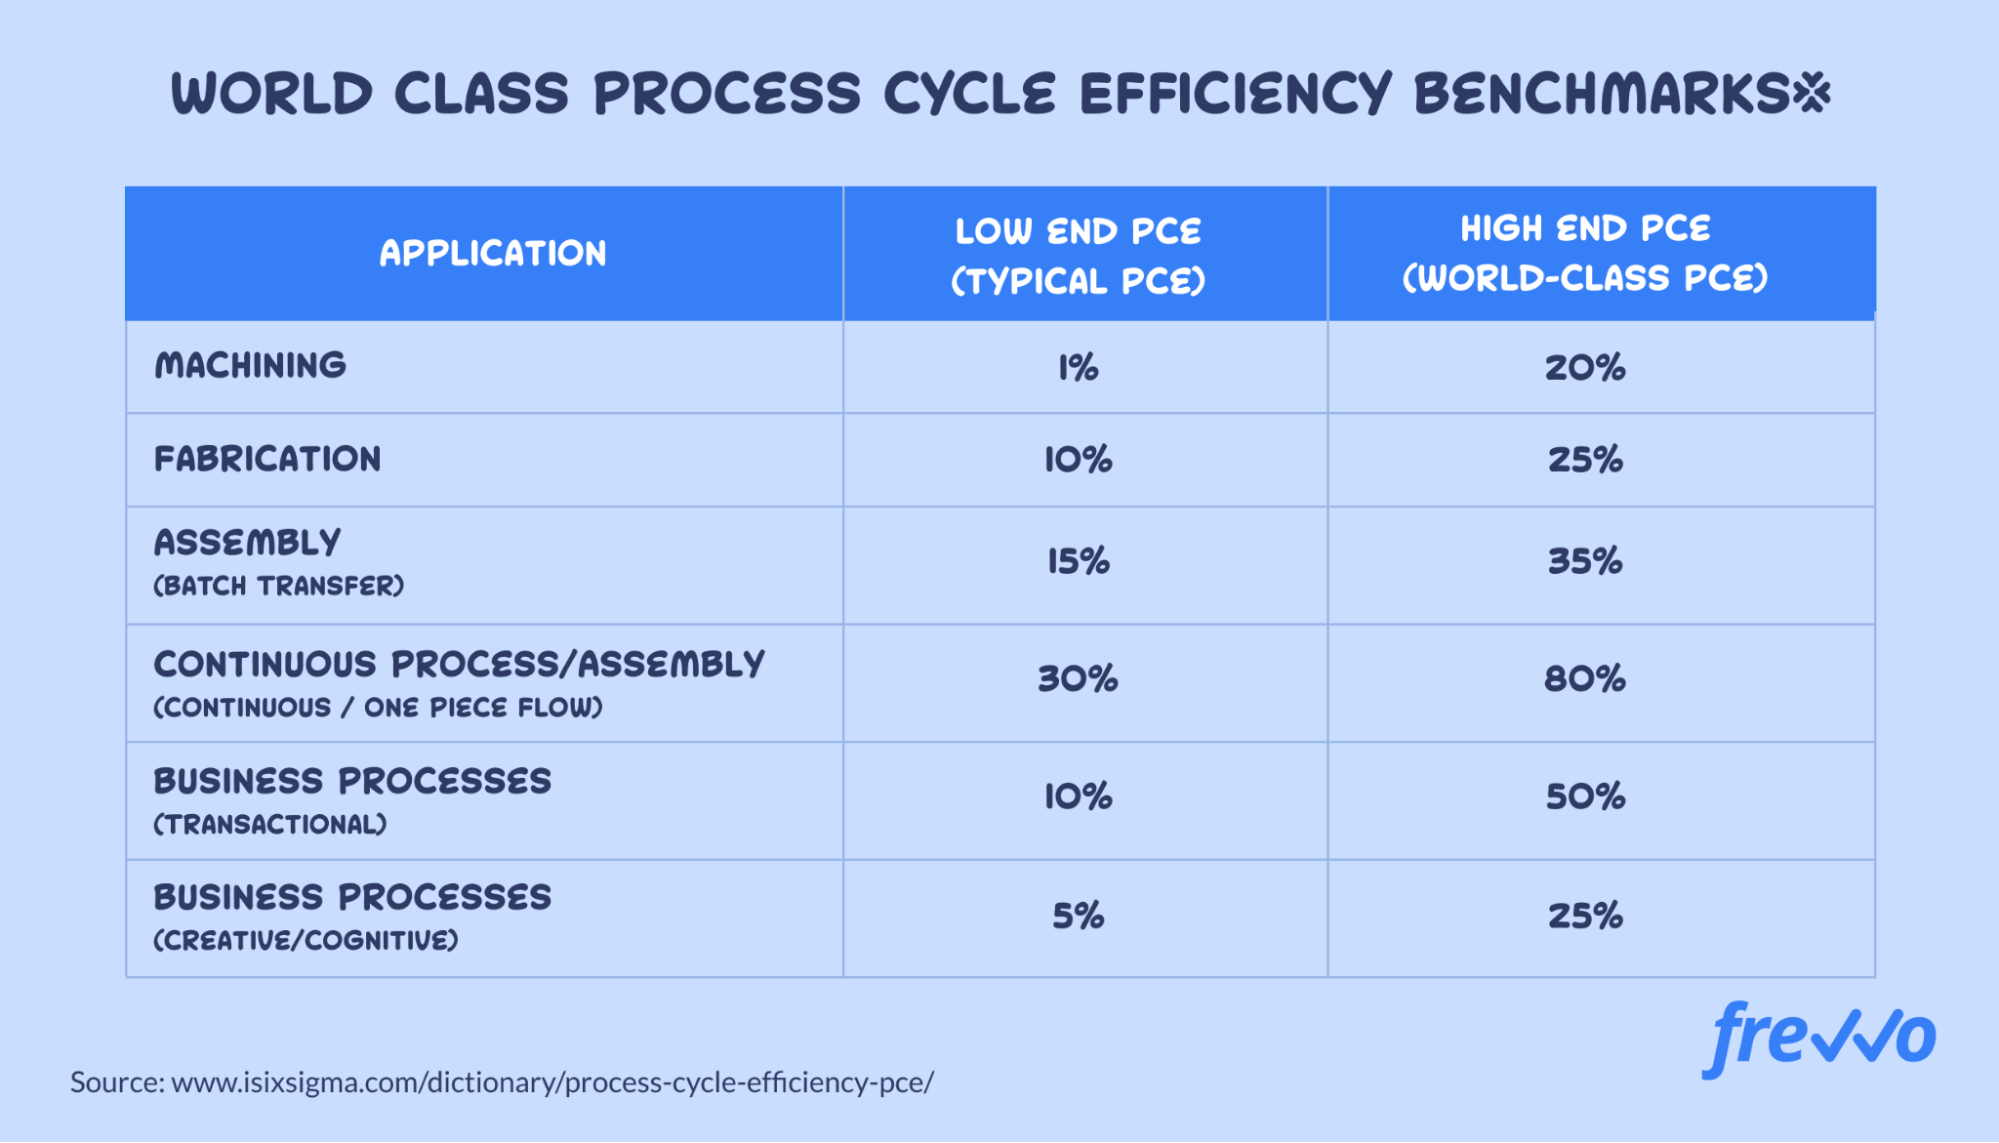 Process cycle efficiency benchmarks for different processes